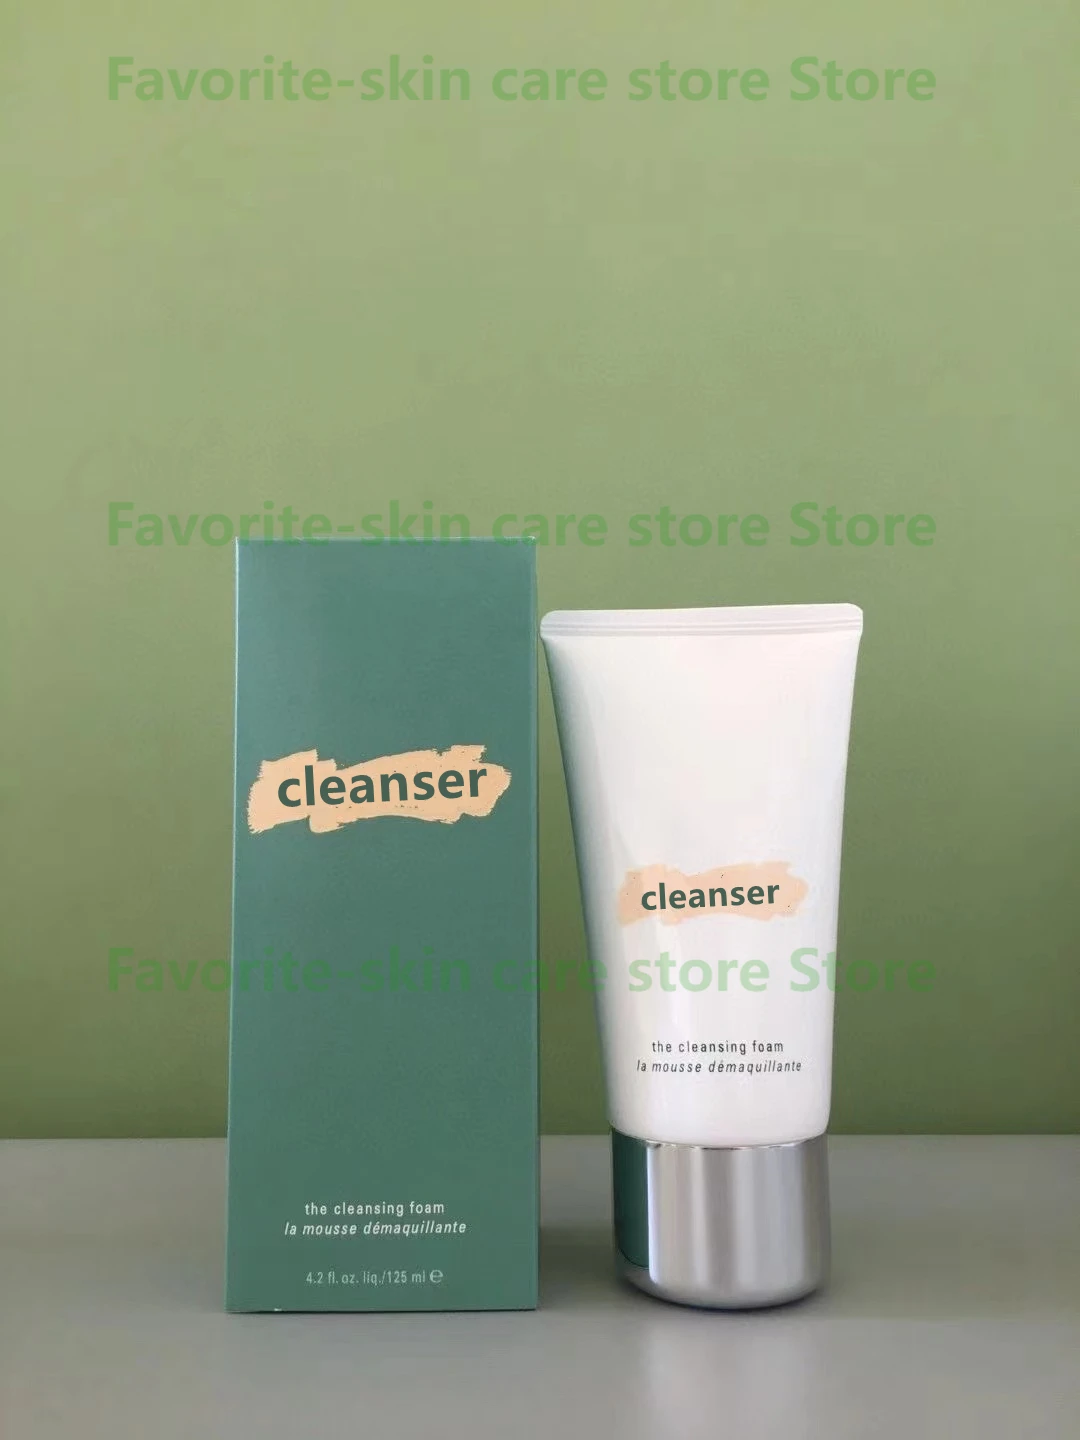 

Brand cleanser the cleansing foam la mousse demaquillante luxury cleanser brand new unopened whitening cleanser 125ML